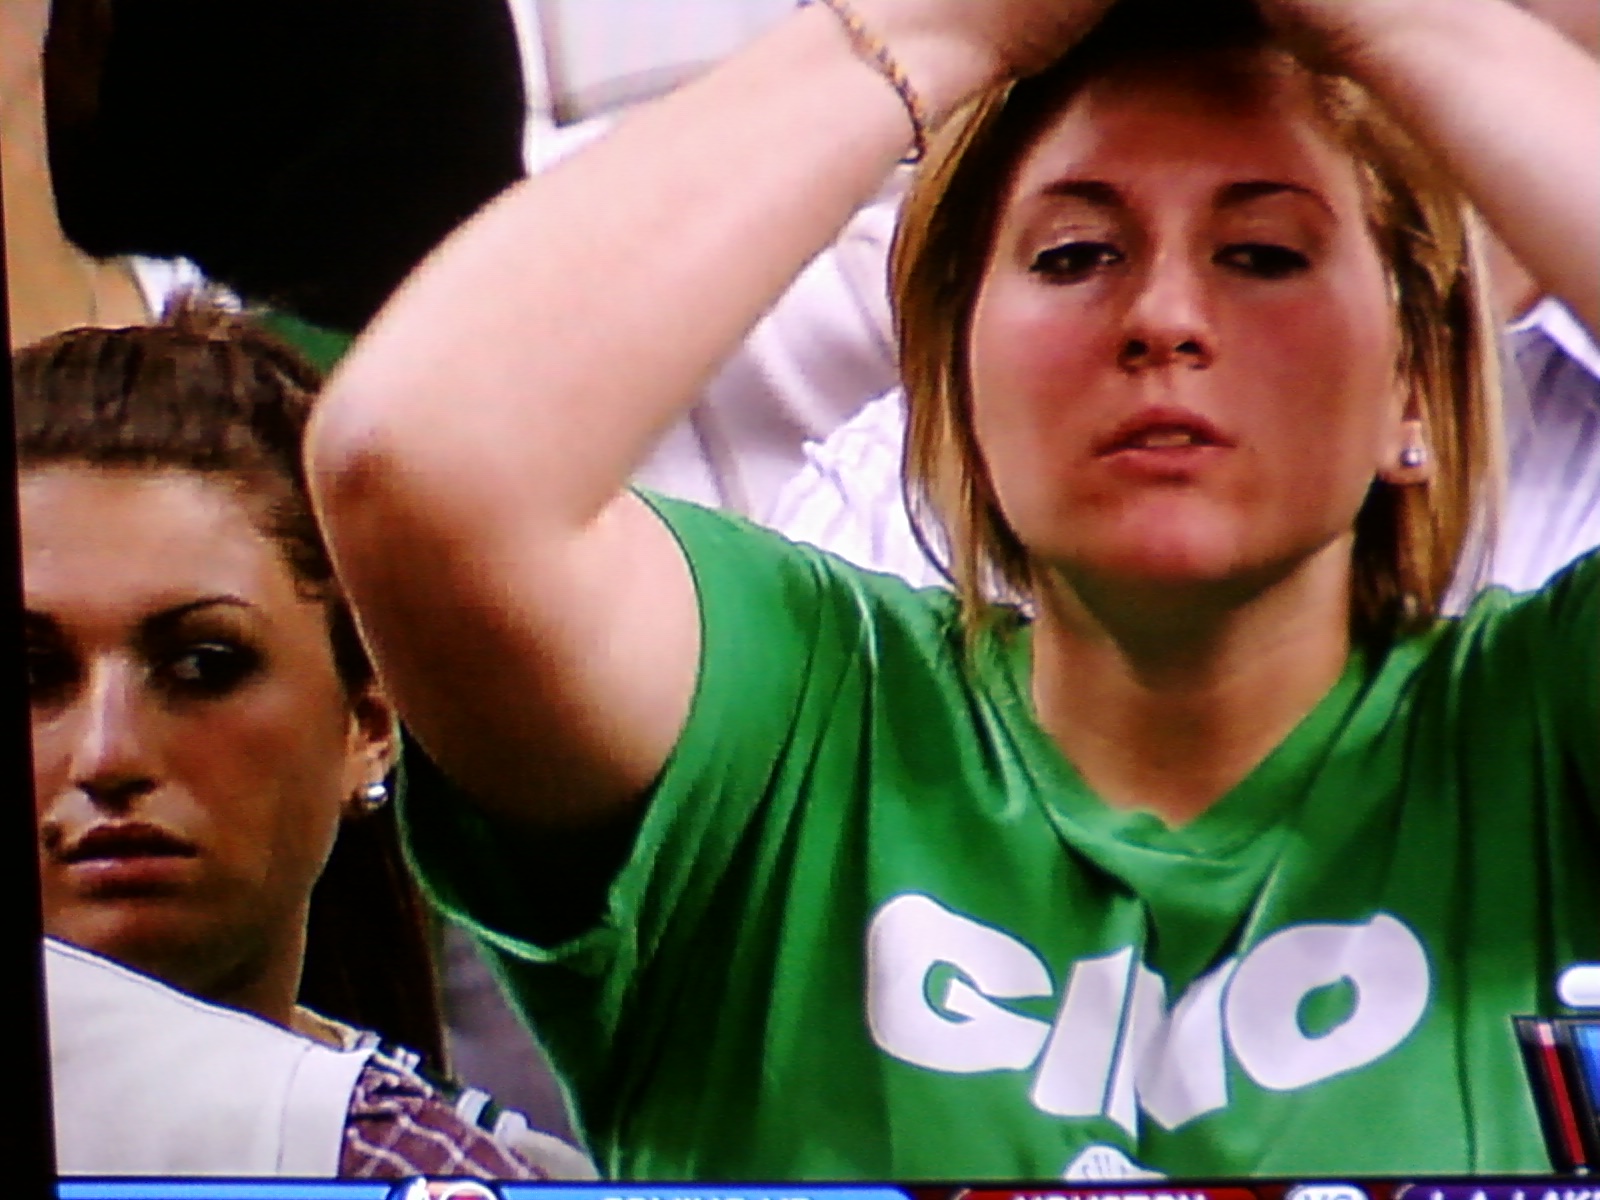 Have you seen Austin Powers? Yeah, we all know the part where Dr. Evil makes fun of the assistants mole. Well, this girl in the left of this picture may have beat that guy out. During the Celtics amazing comeback against the Magic in the 5th game of the series.